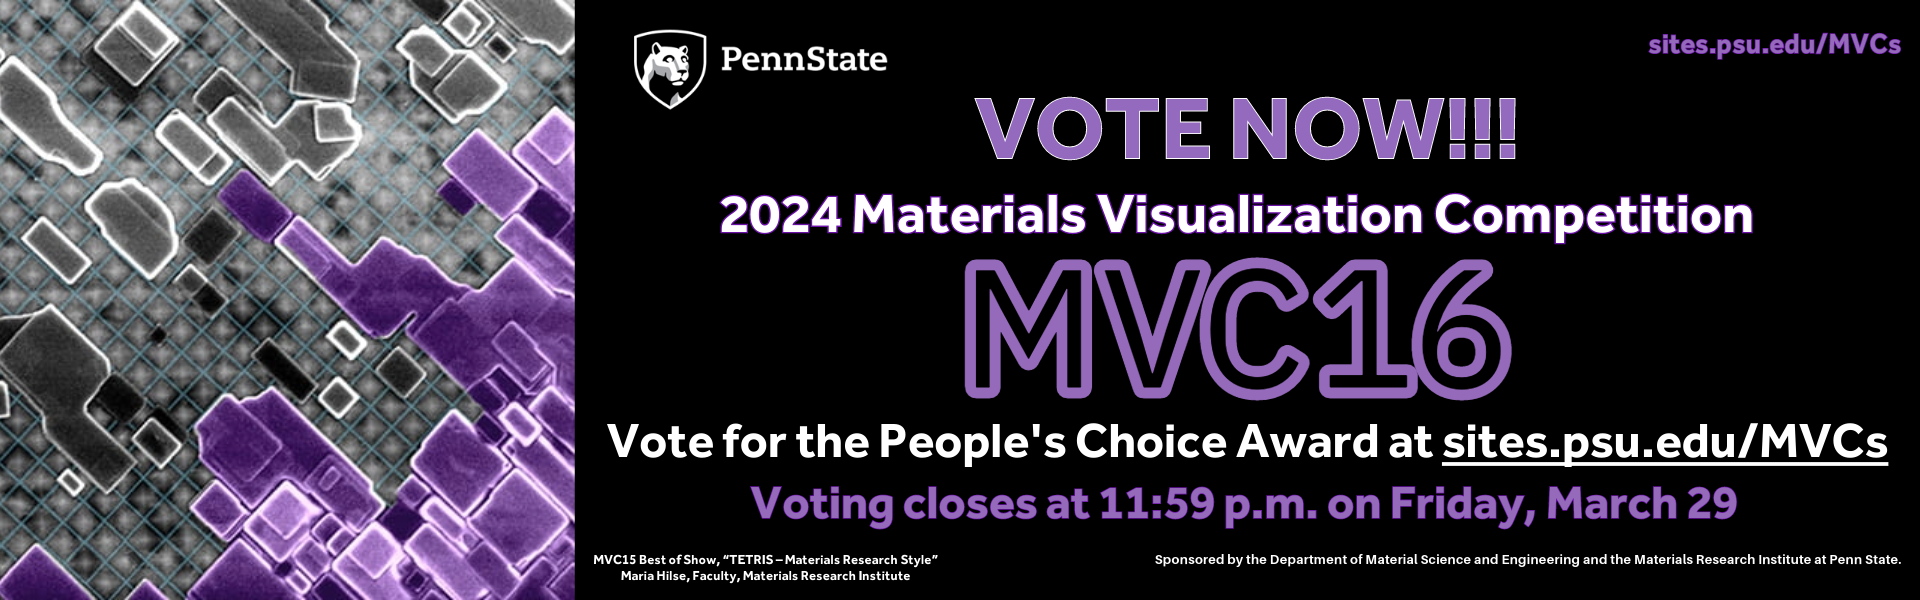 MVC16 Vote for People's Choice Award